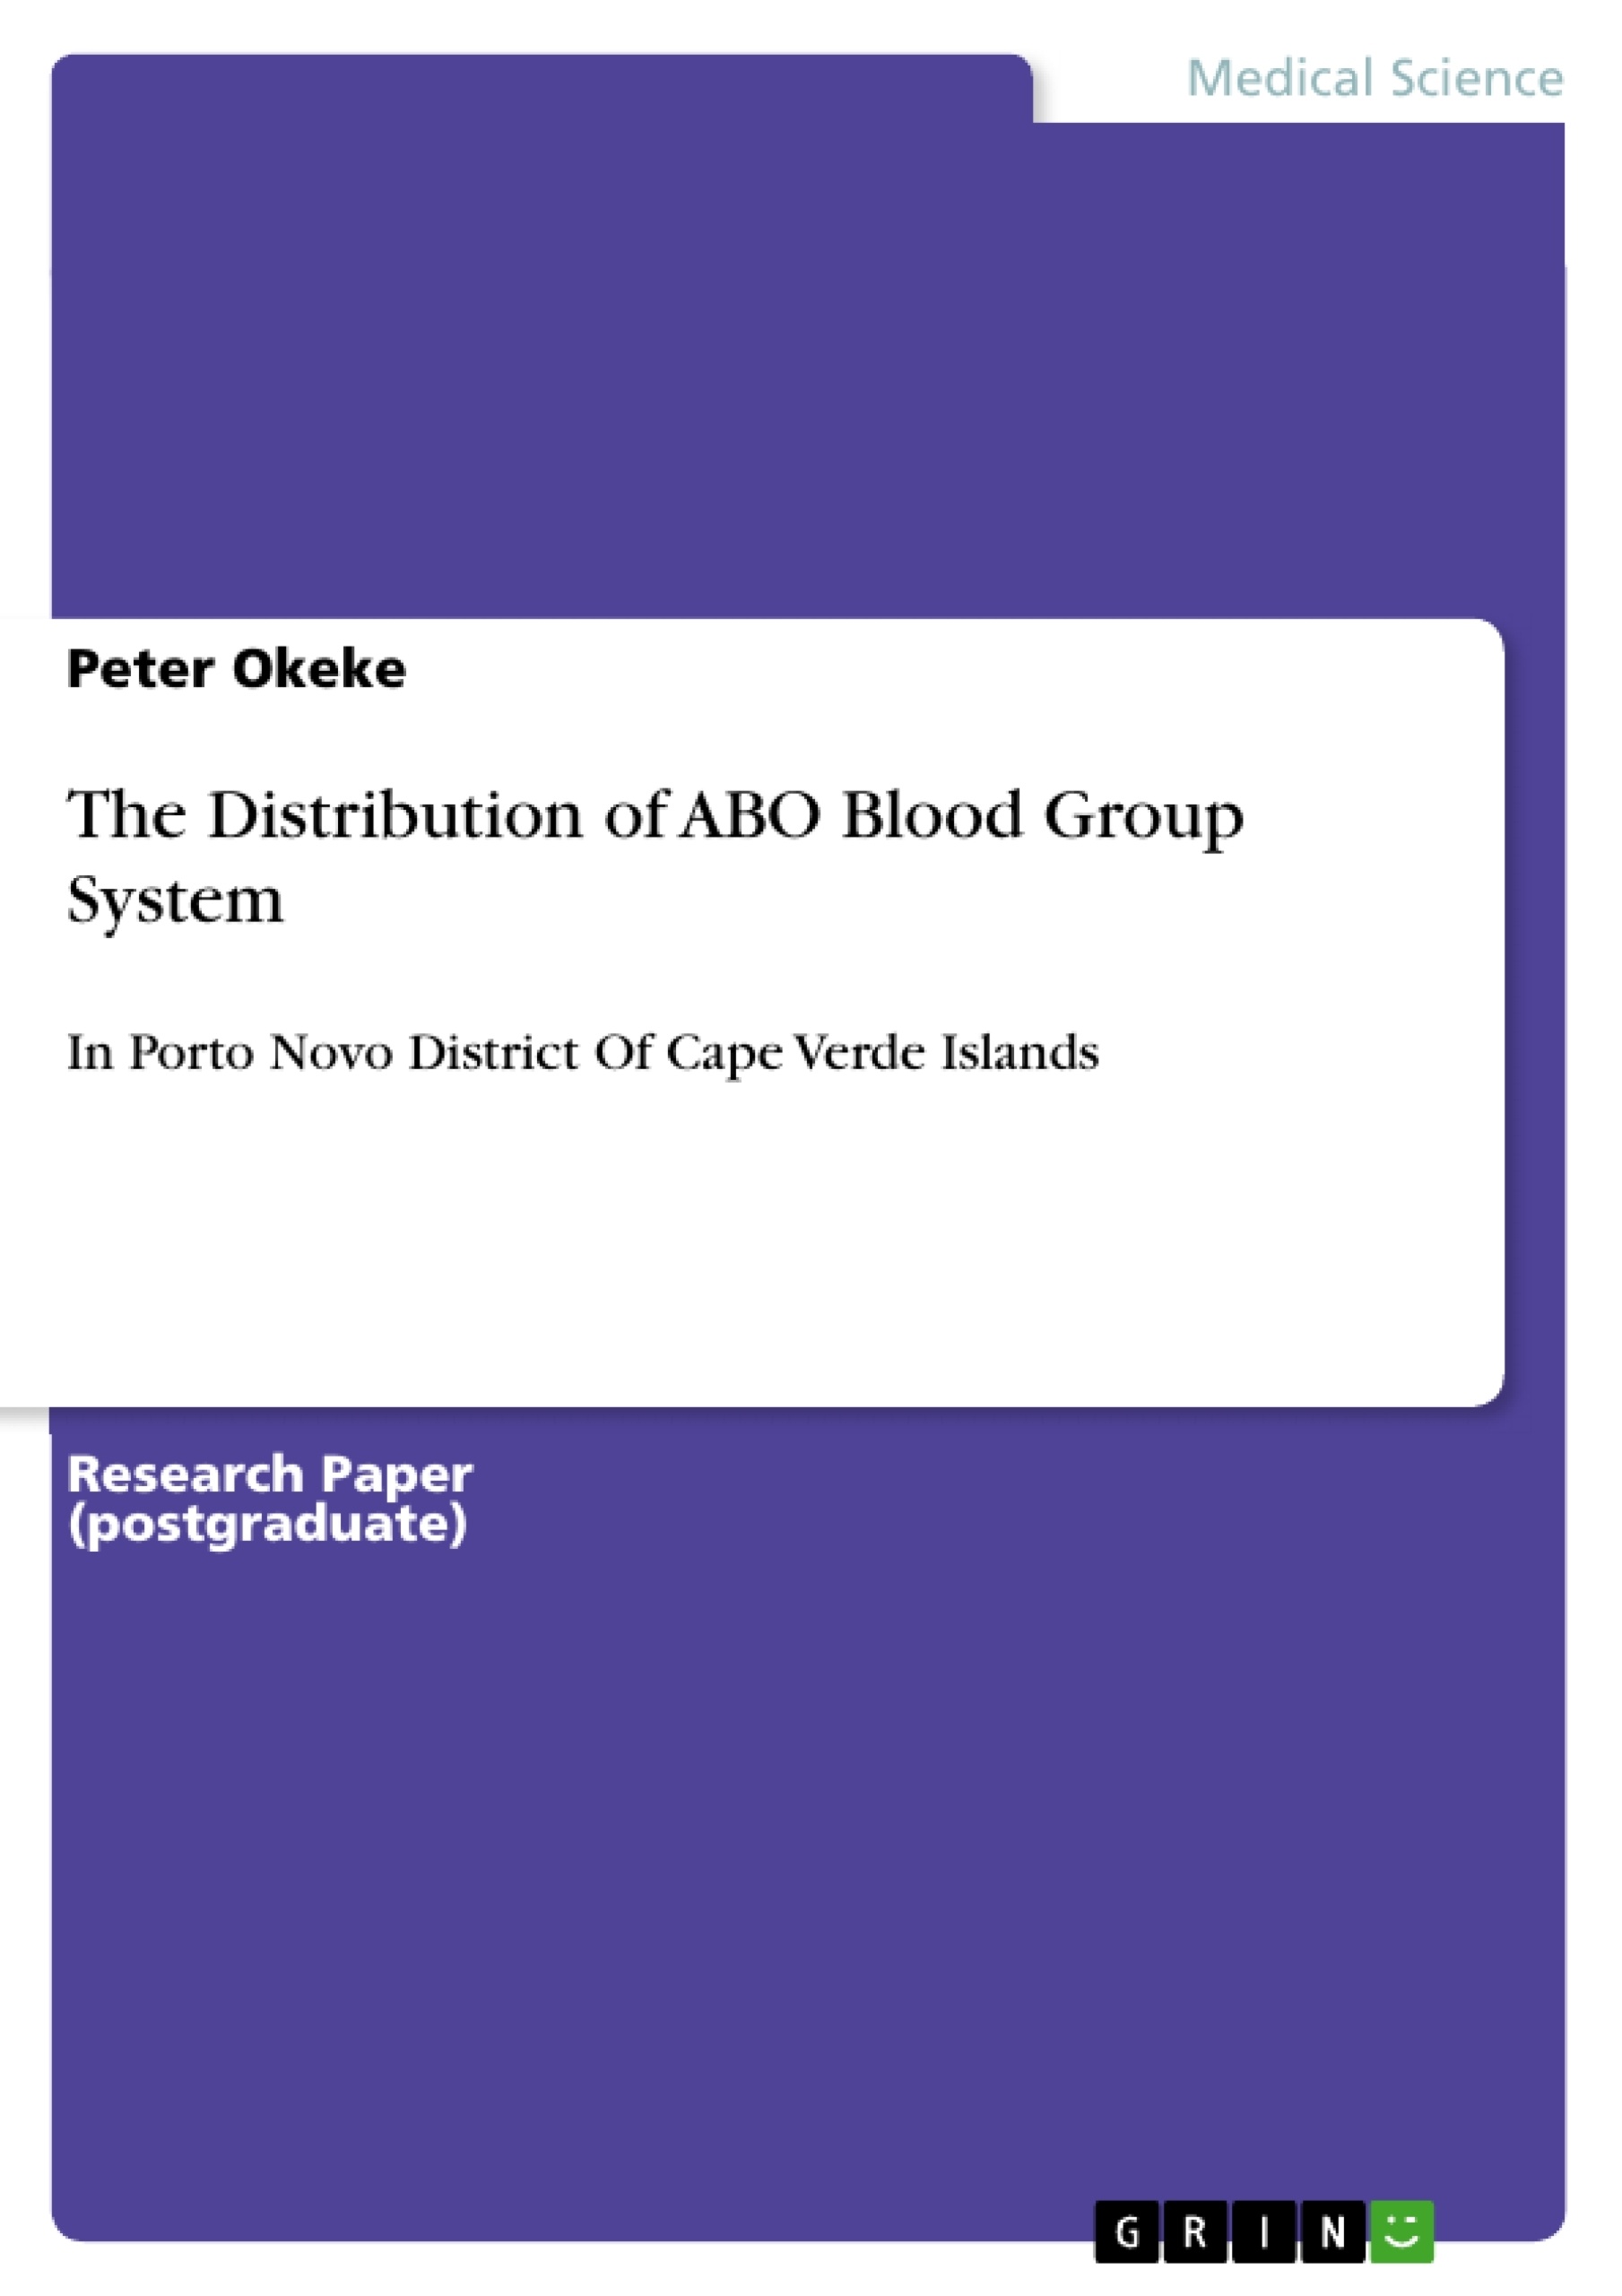 Titre: The Distribution of ABO Blood Group System